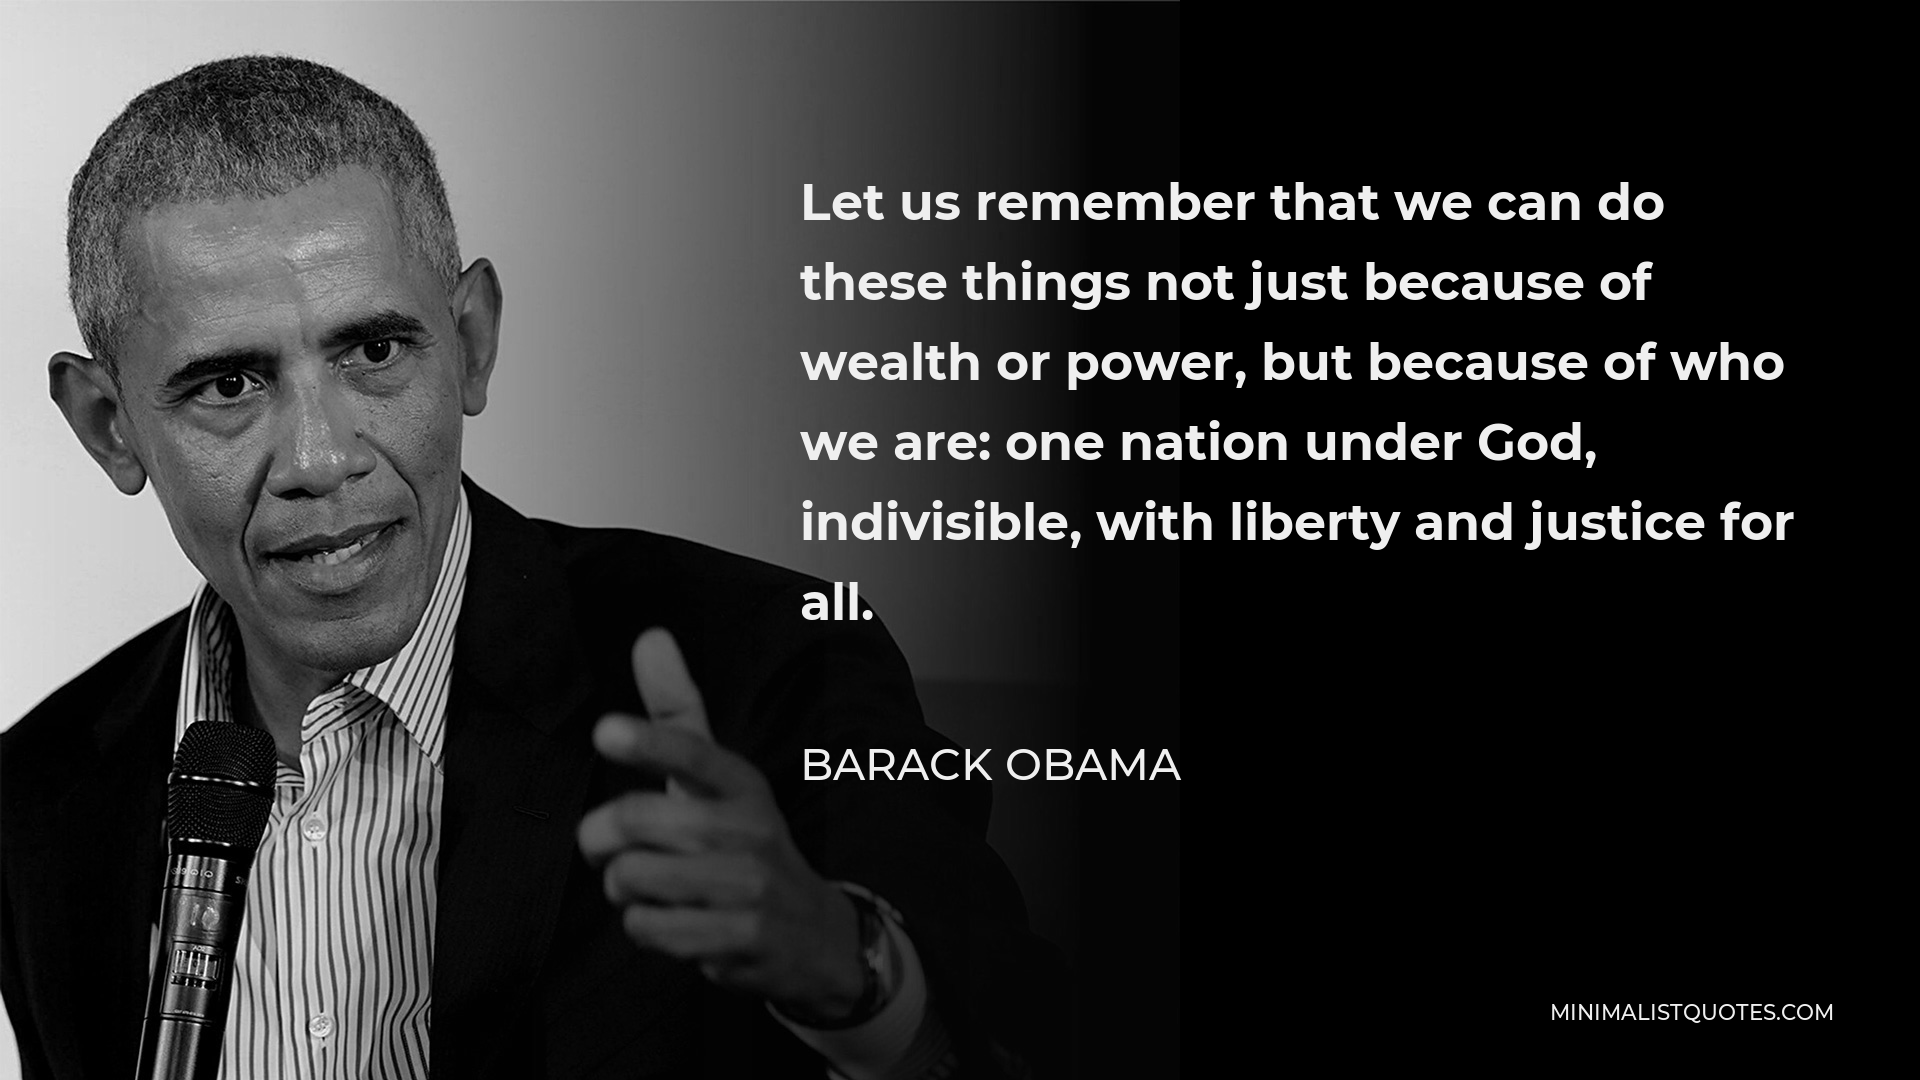 Barack Obama Quote - Let us remember that we can do these things not just because of wealth or power, but because of who we are: one nation under God, indivisible, with liberty and justice for all.